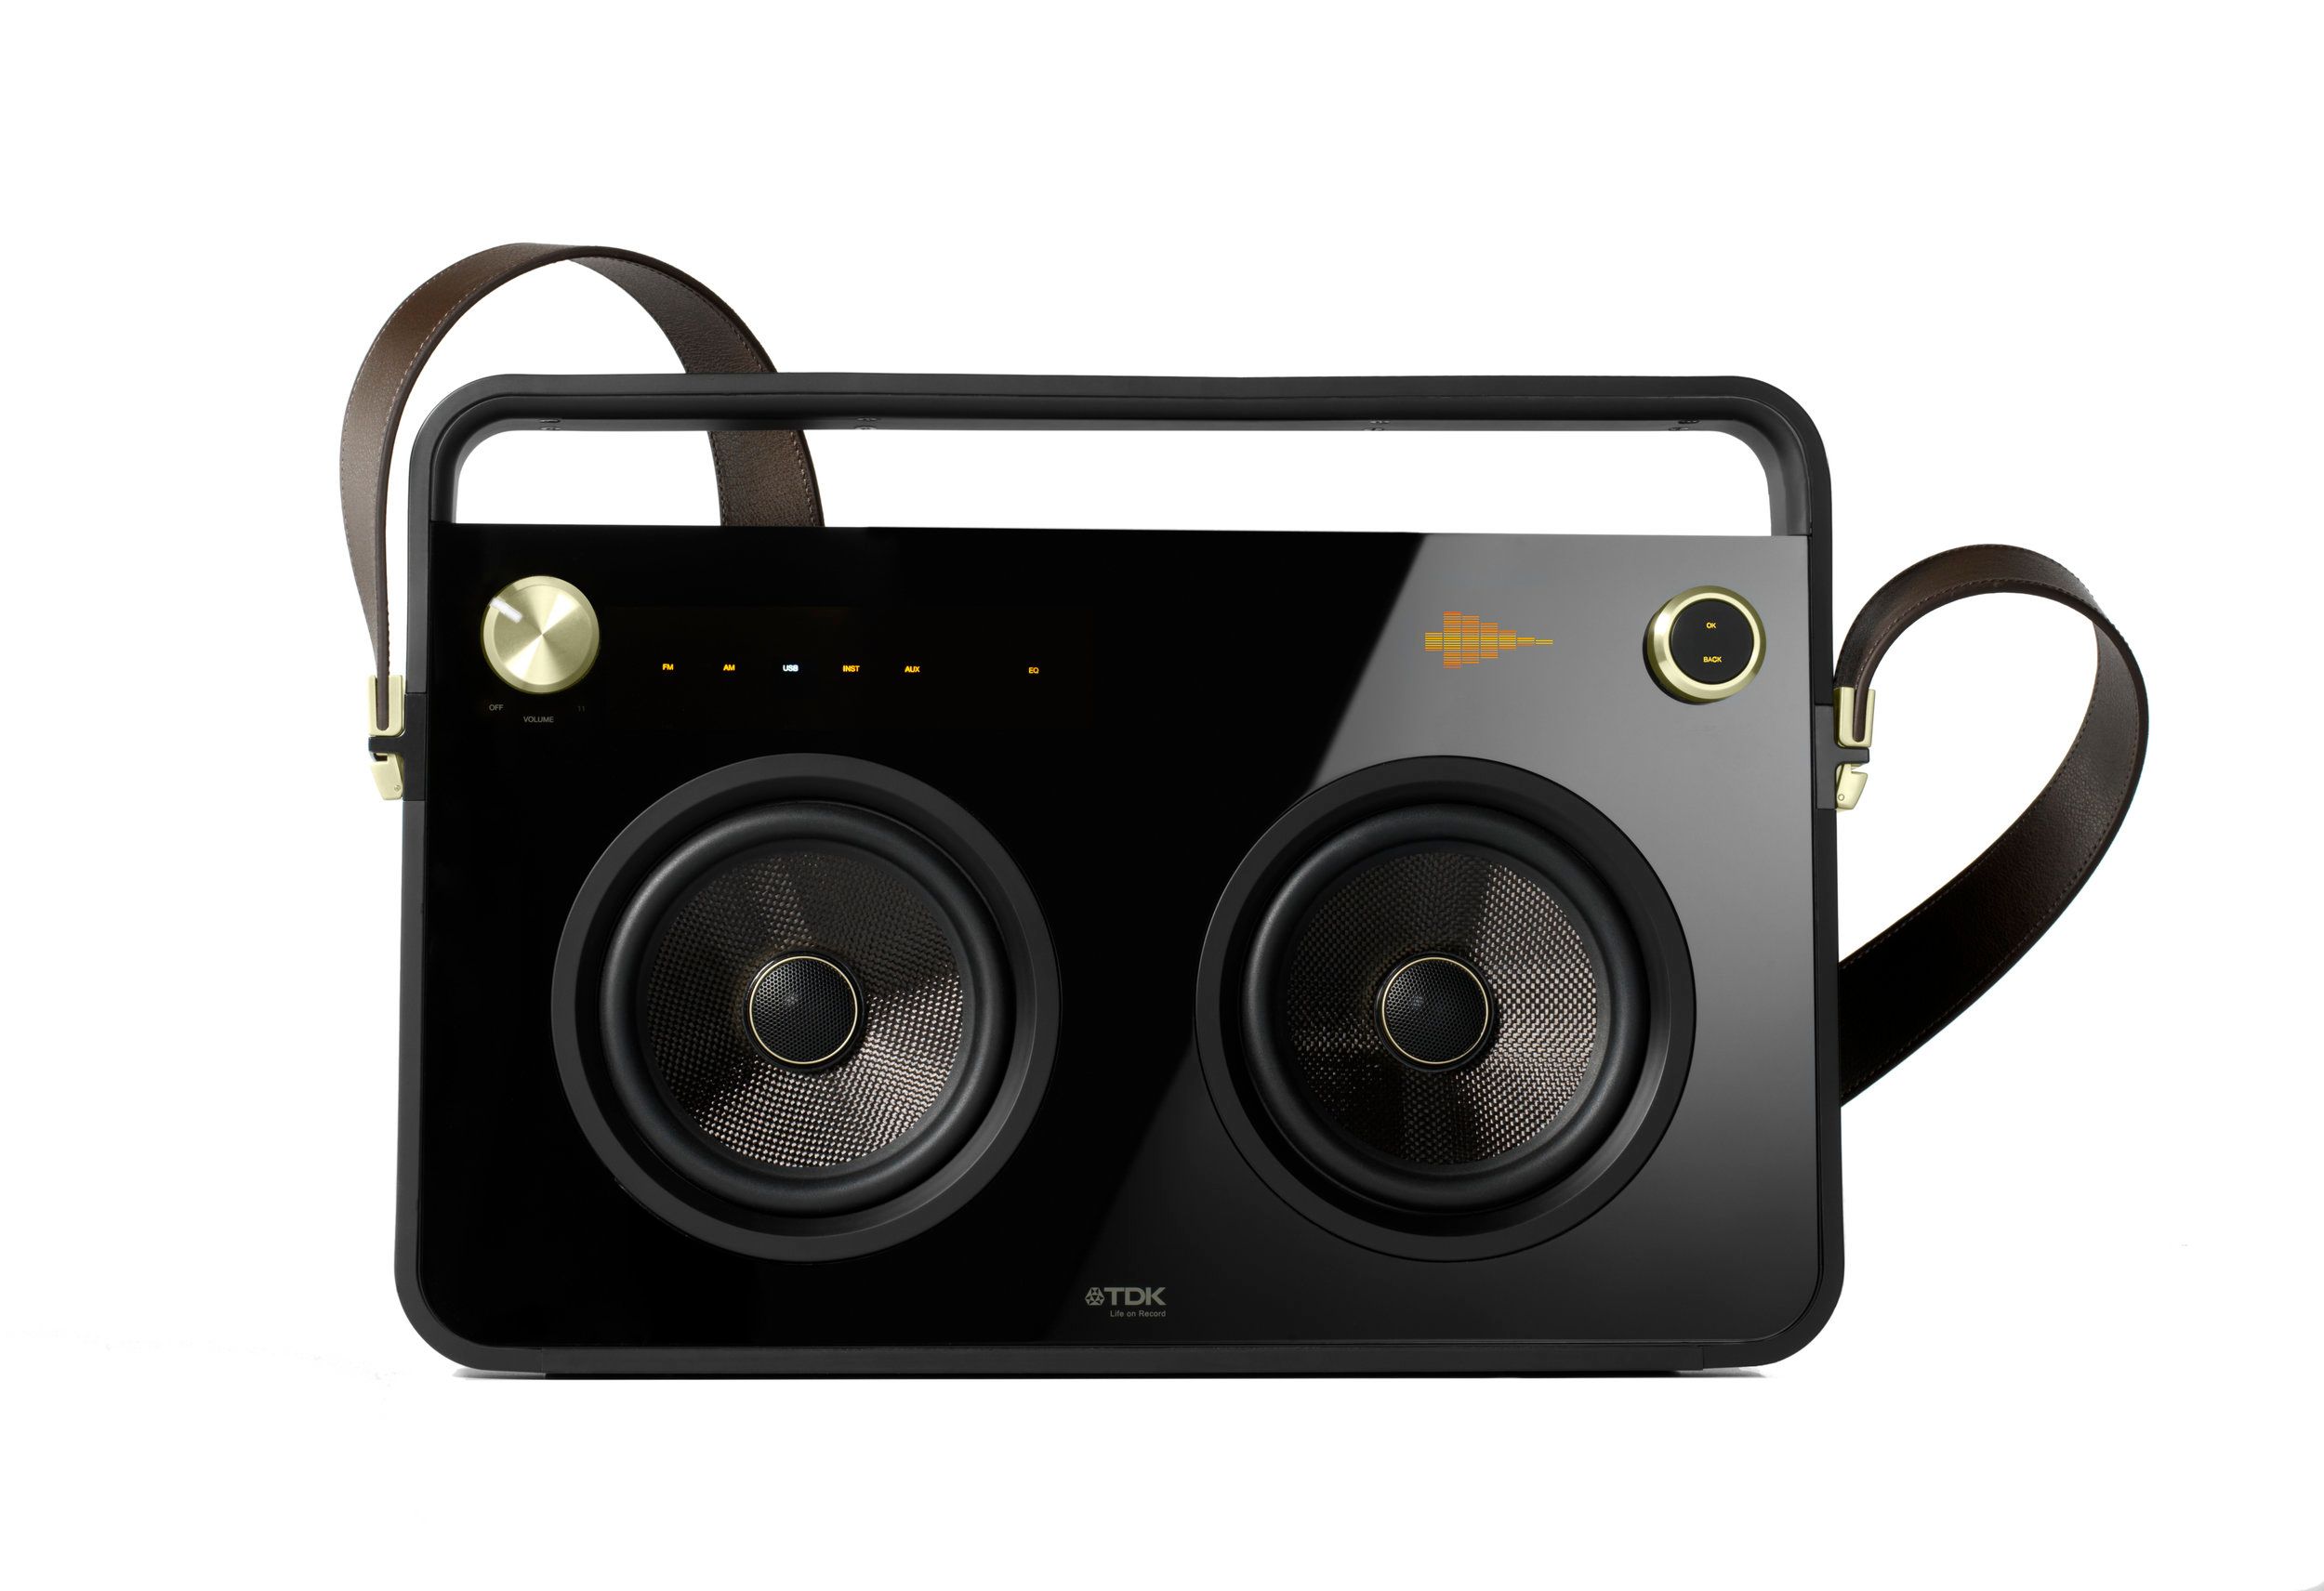 Black boombox with a gold knob in the top left, two speakers in the middle, and a brown leather strap buckled to the sides